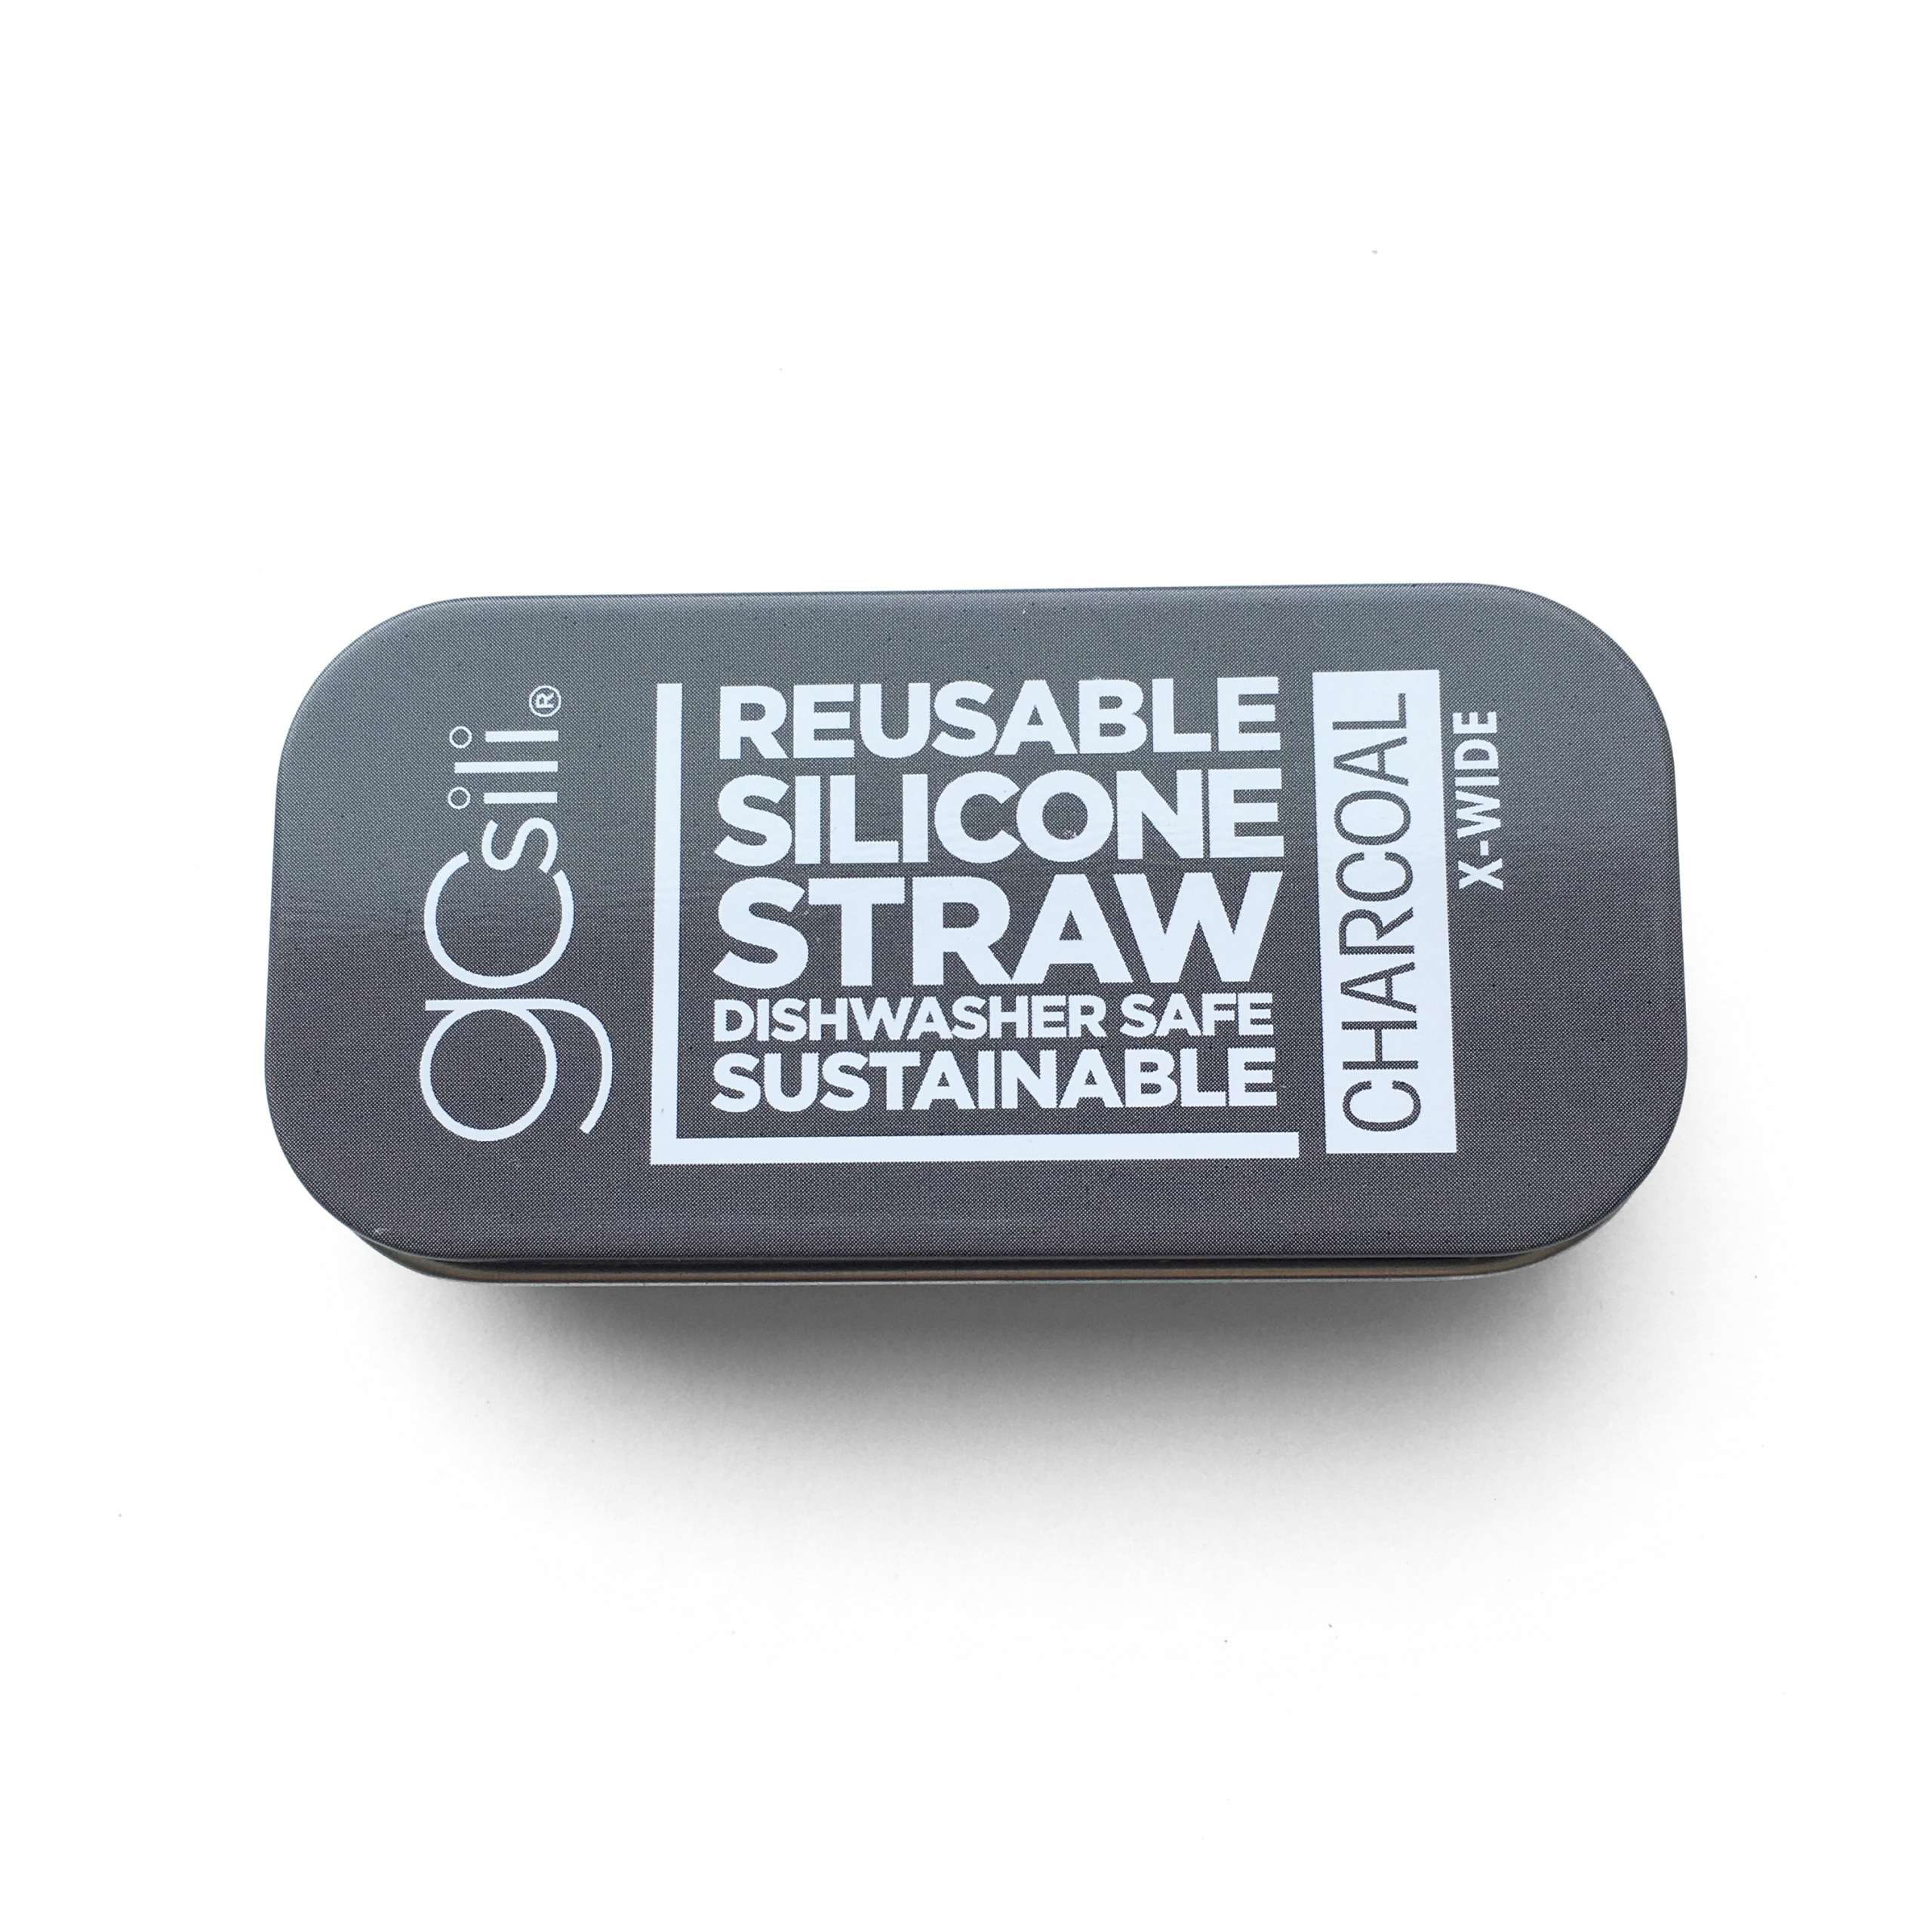 Reusable Silicone Straw X-Wide Travel Case Charcoal